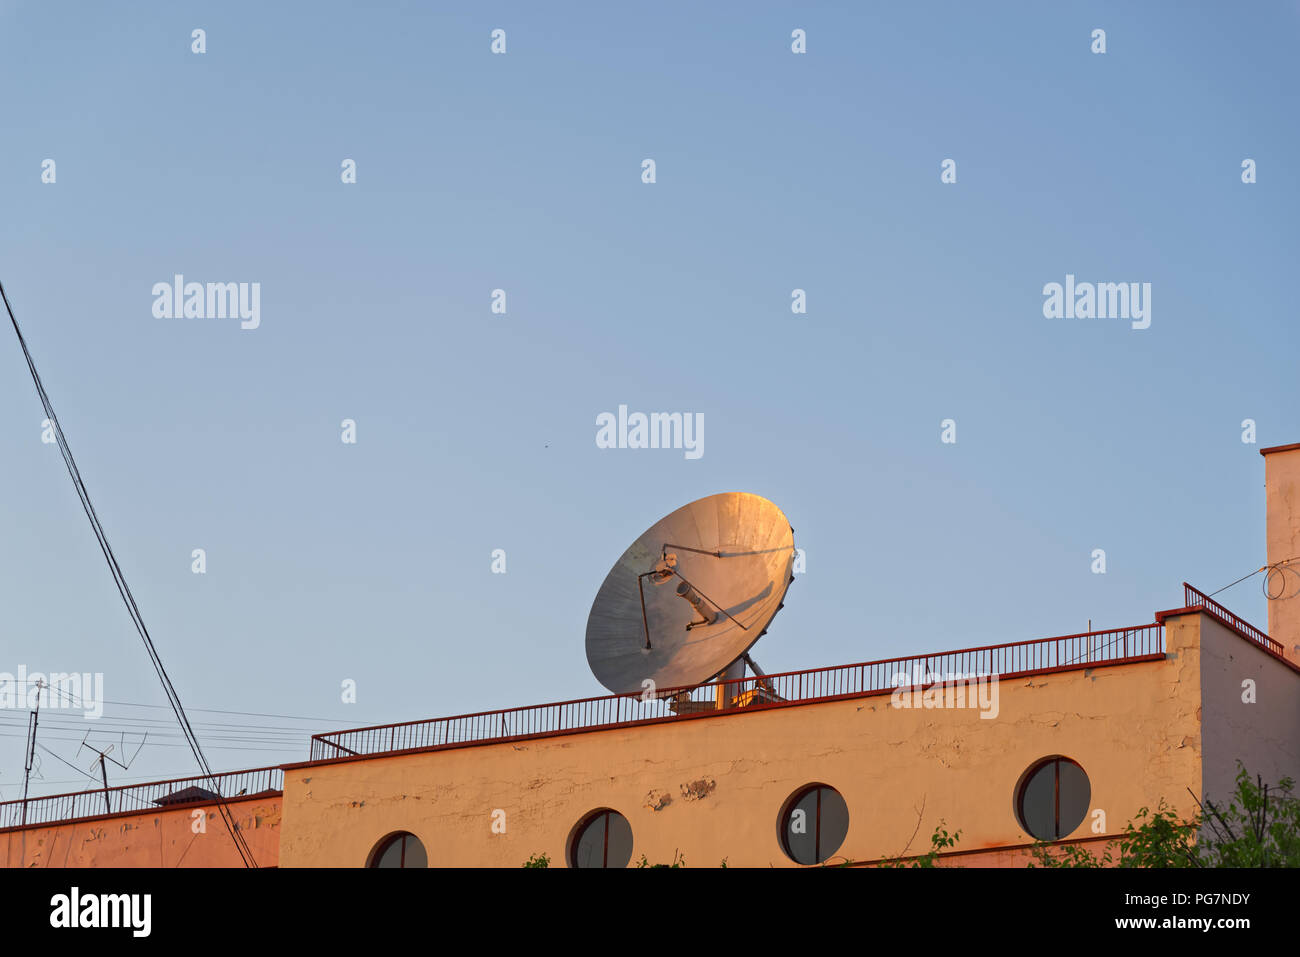 Big communication satellite dish on the roof of old building against clear blue sky. Khabarovsk, Russia Stock Photo